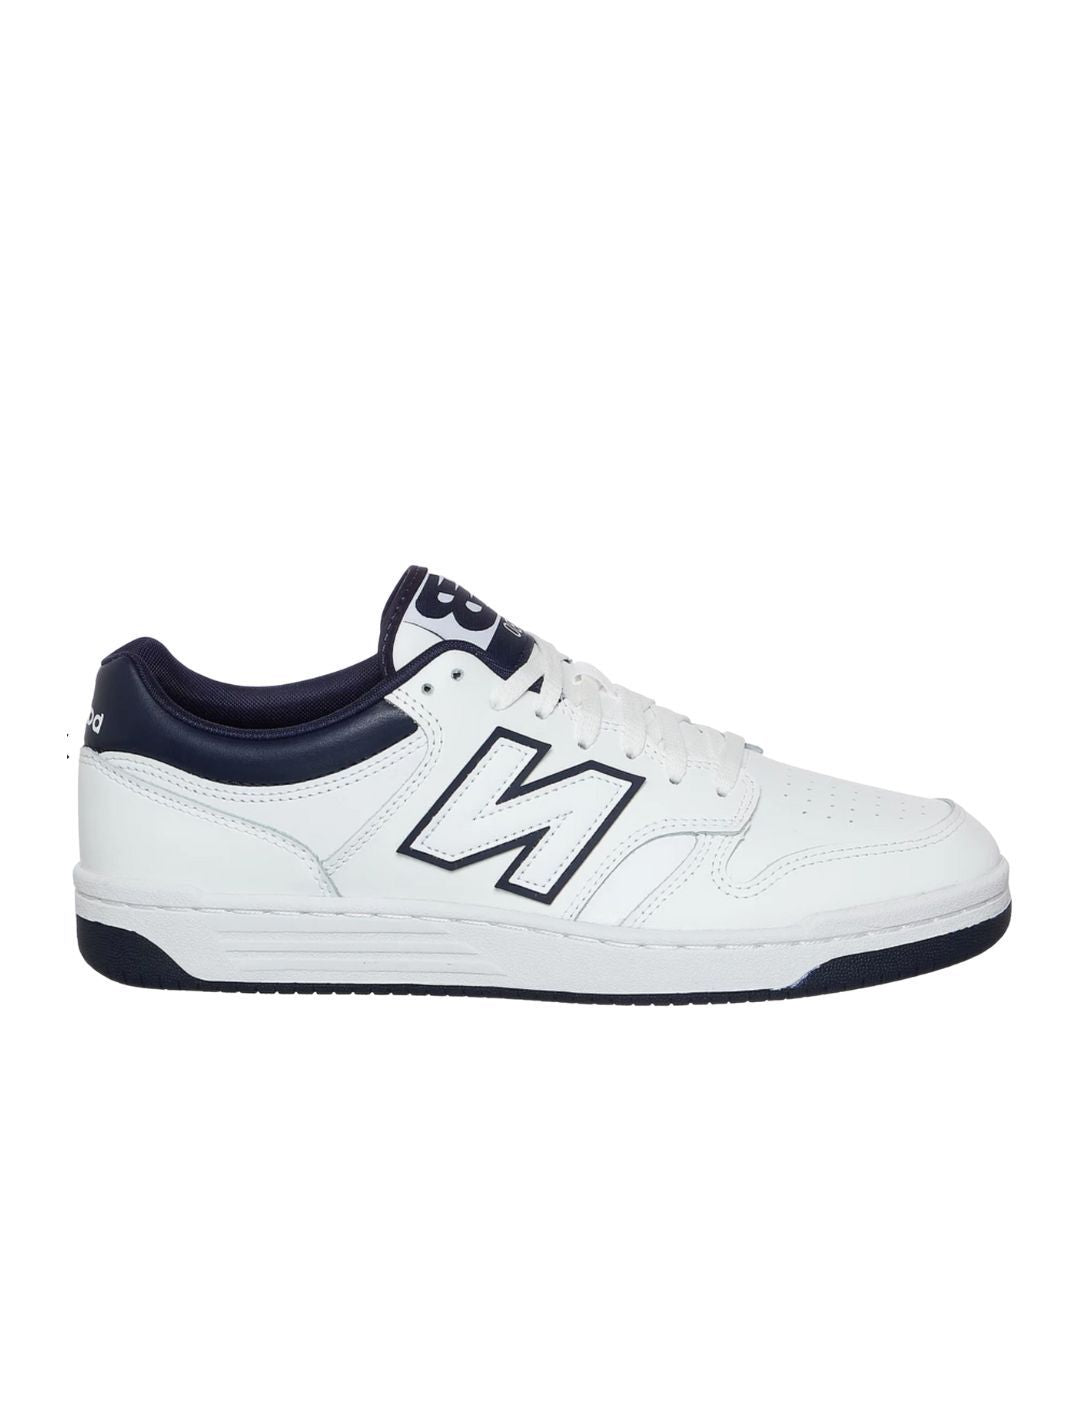 New Balance Shoes Sneakers | BB480LWN White/Navy